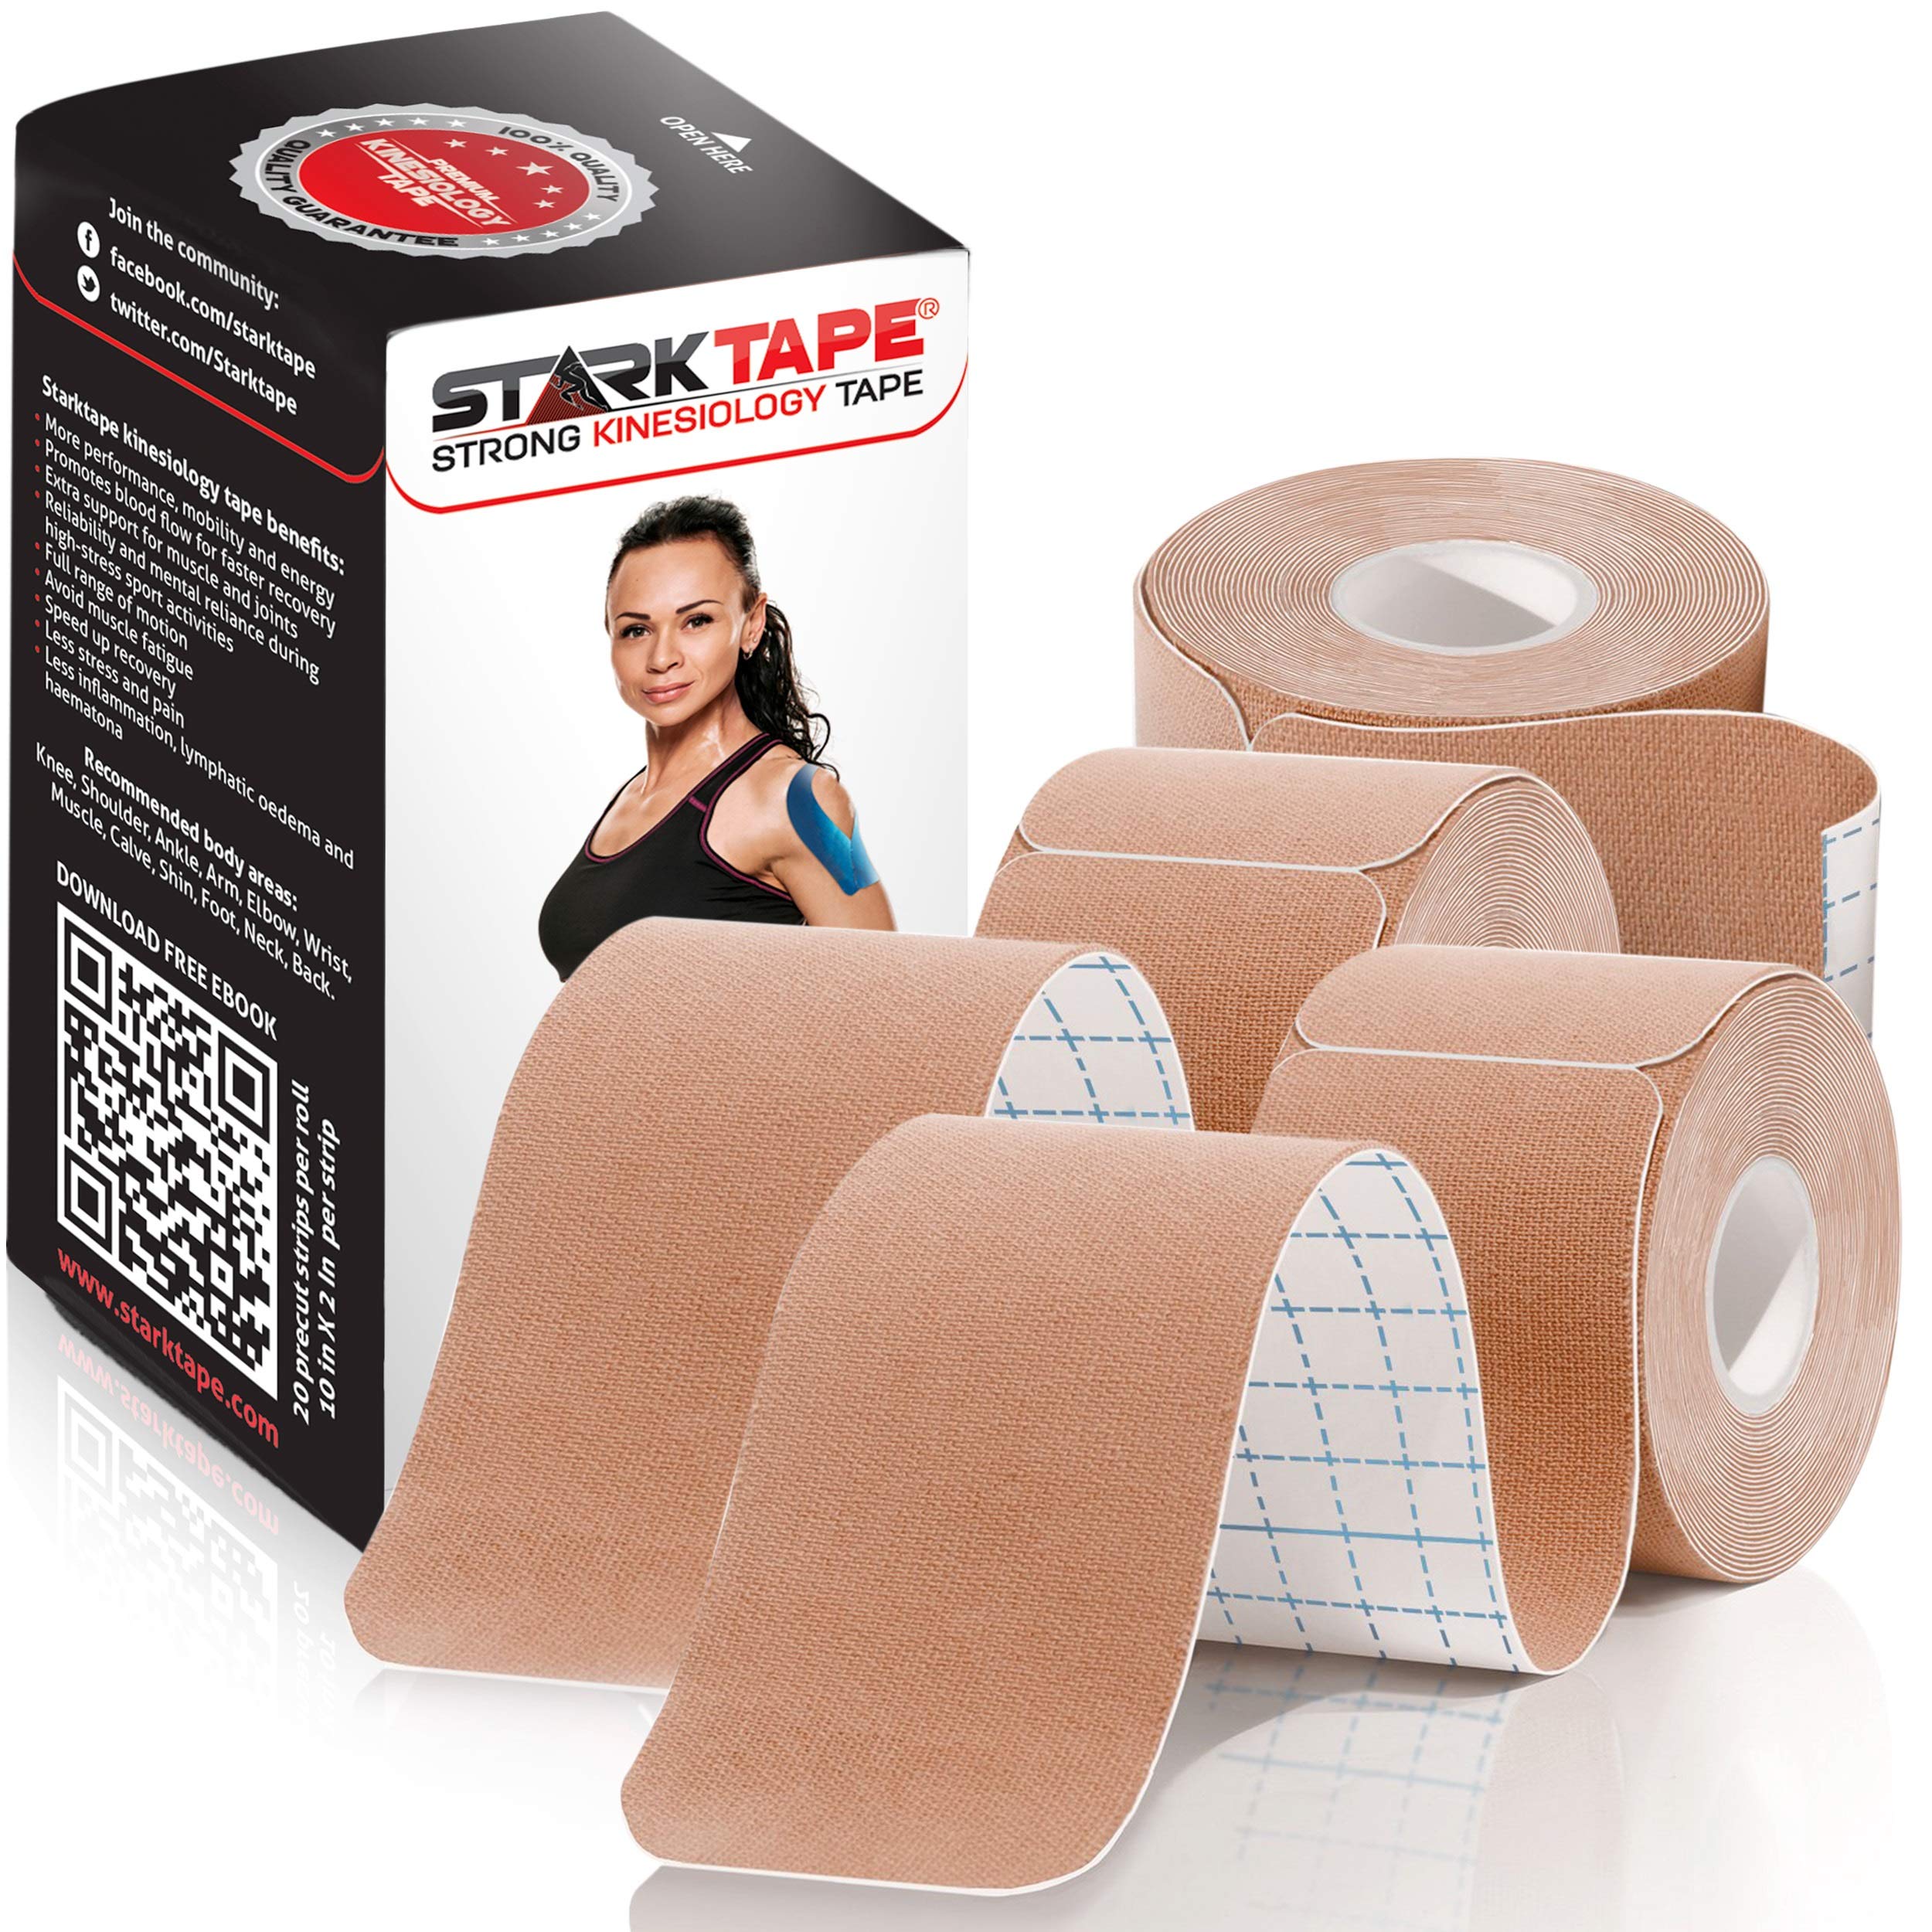 Starktape Foot and Leg Stretcher. Stretching Strap Loops for